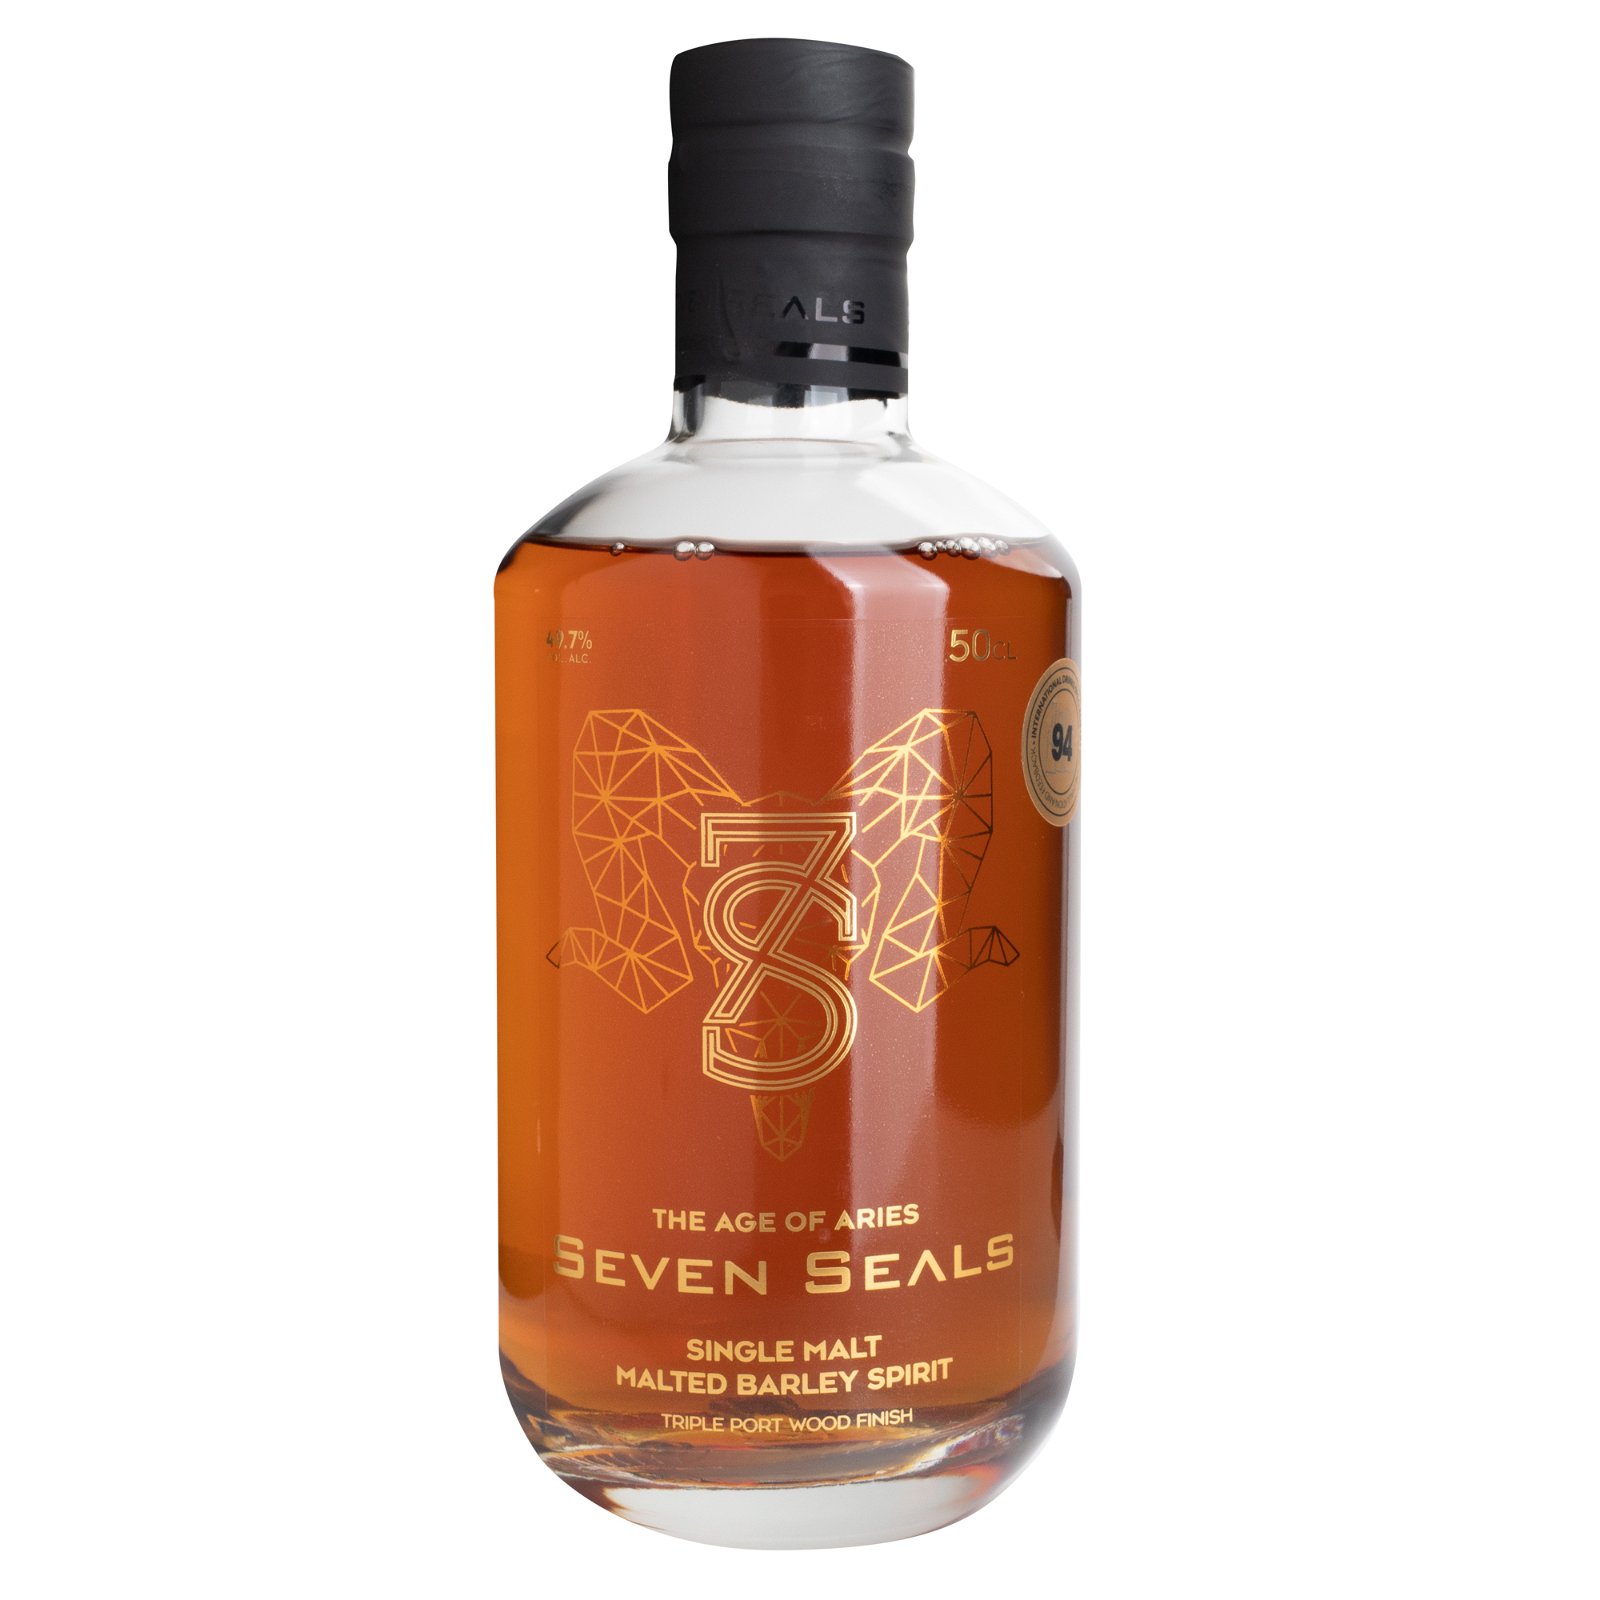 Seven Seals The Age of Aries Triple Port Wood Finish